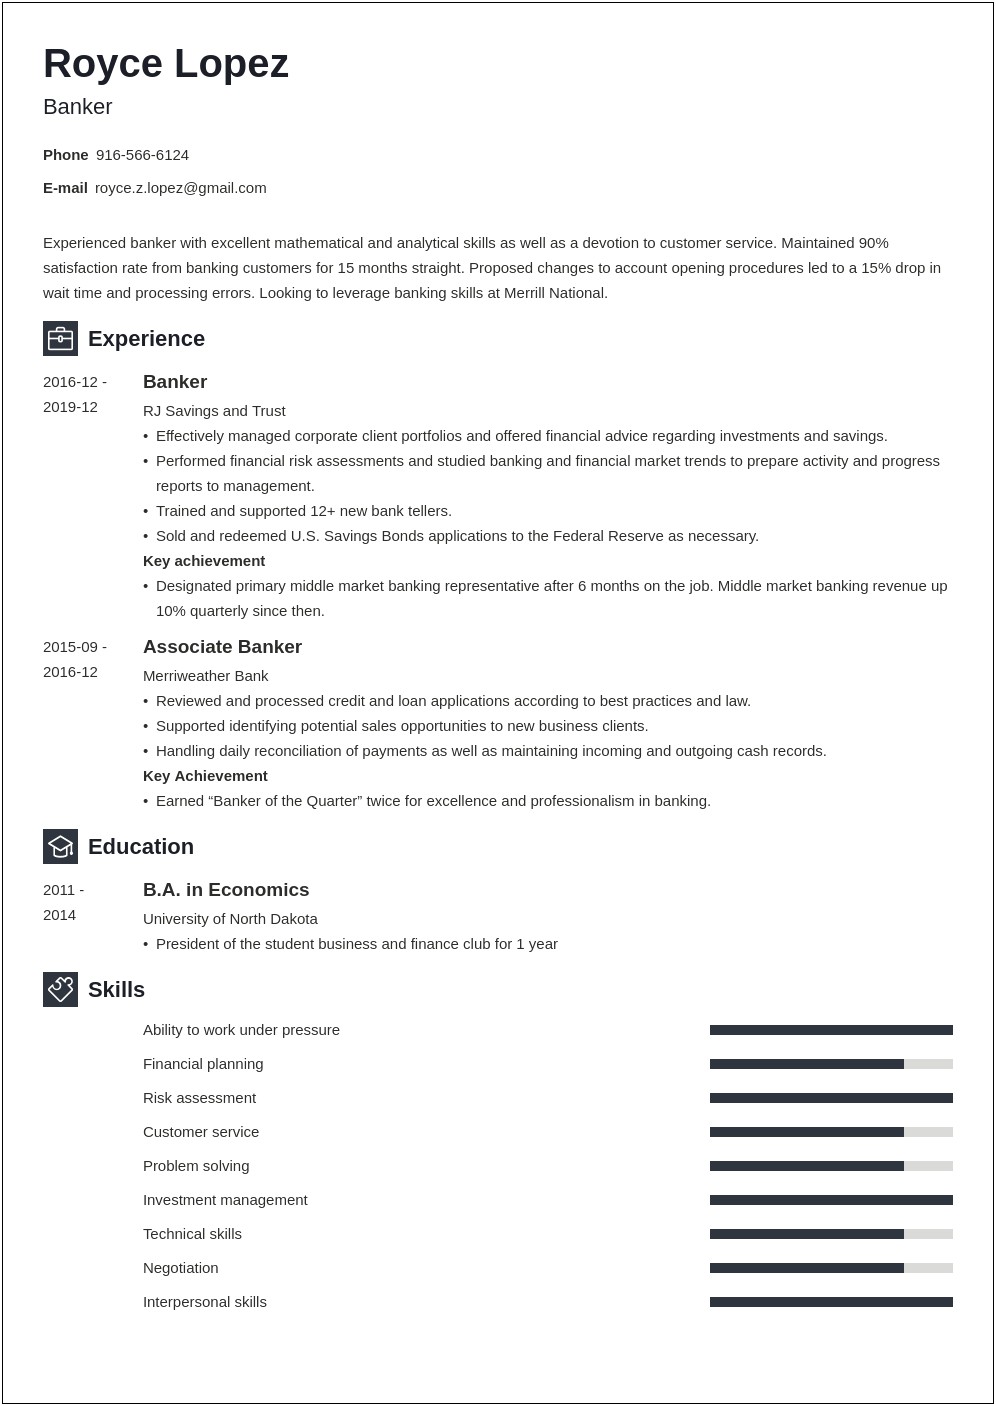 Resume Summary Statement For Collections Banking Background